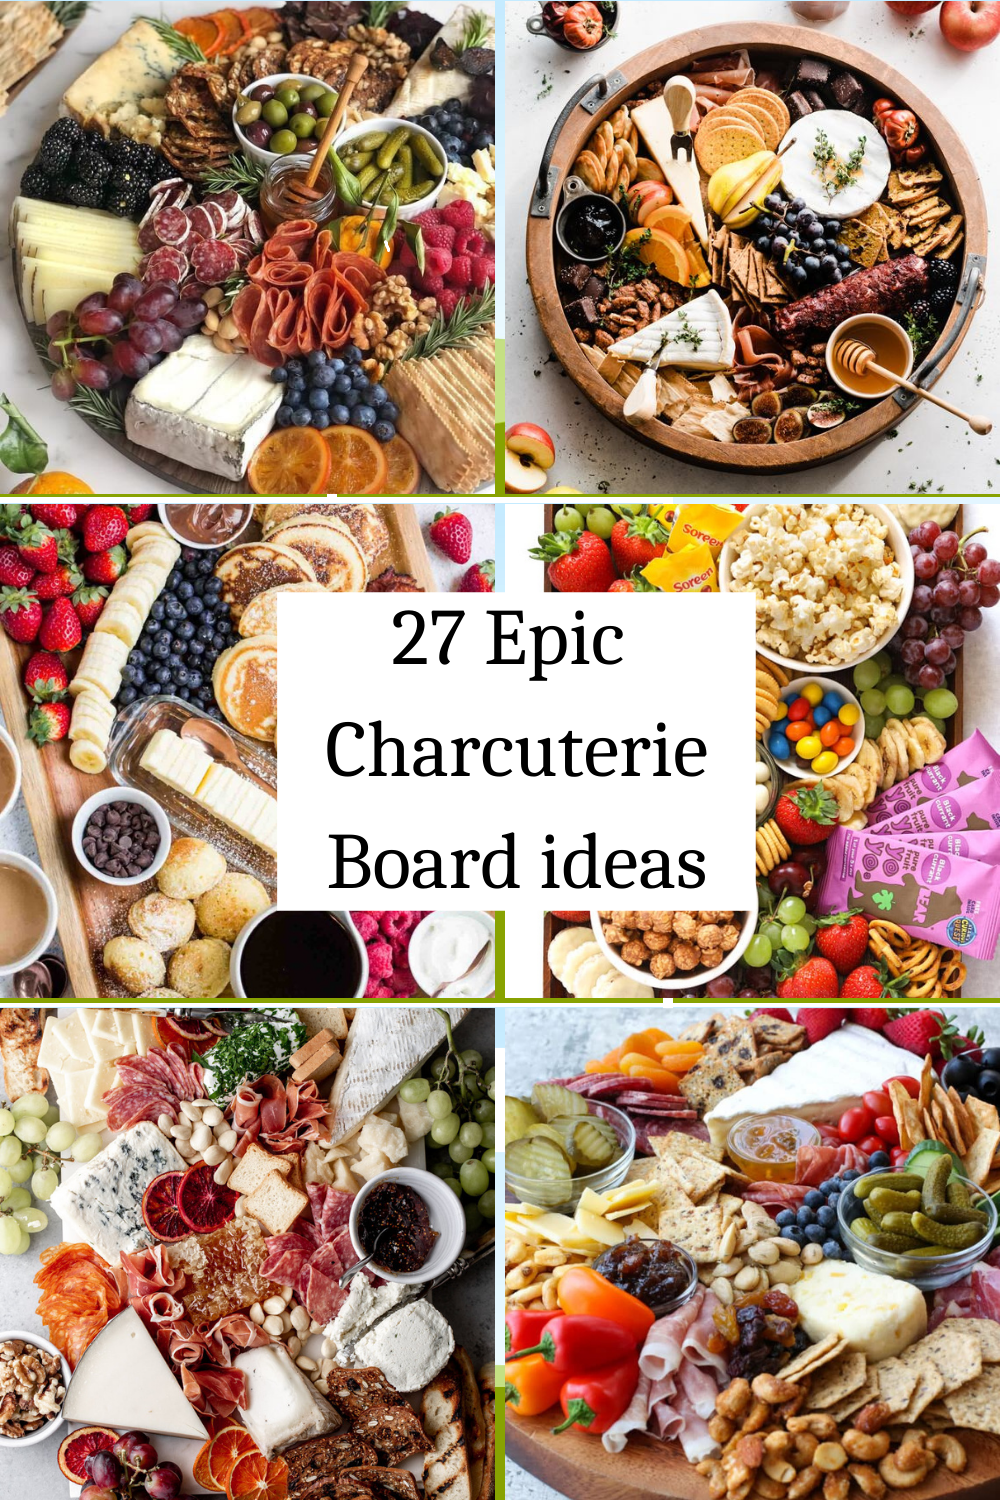 Elegant Charcuterie Board with a variety of gourmet ingredients